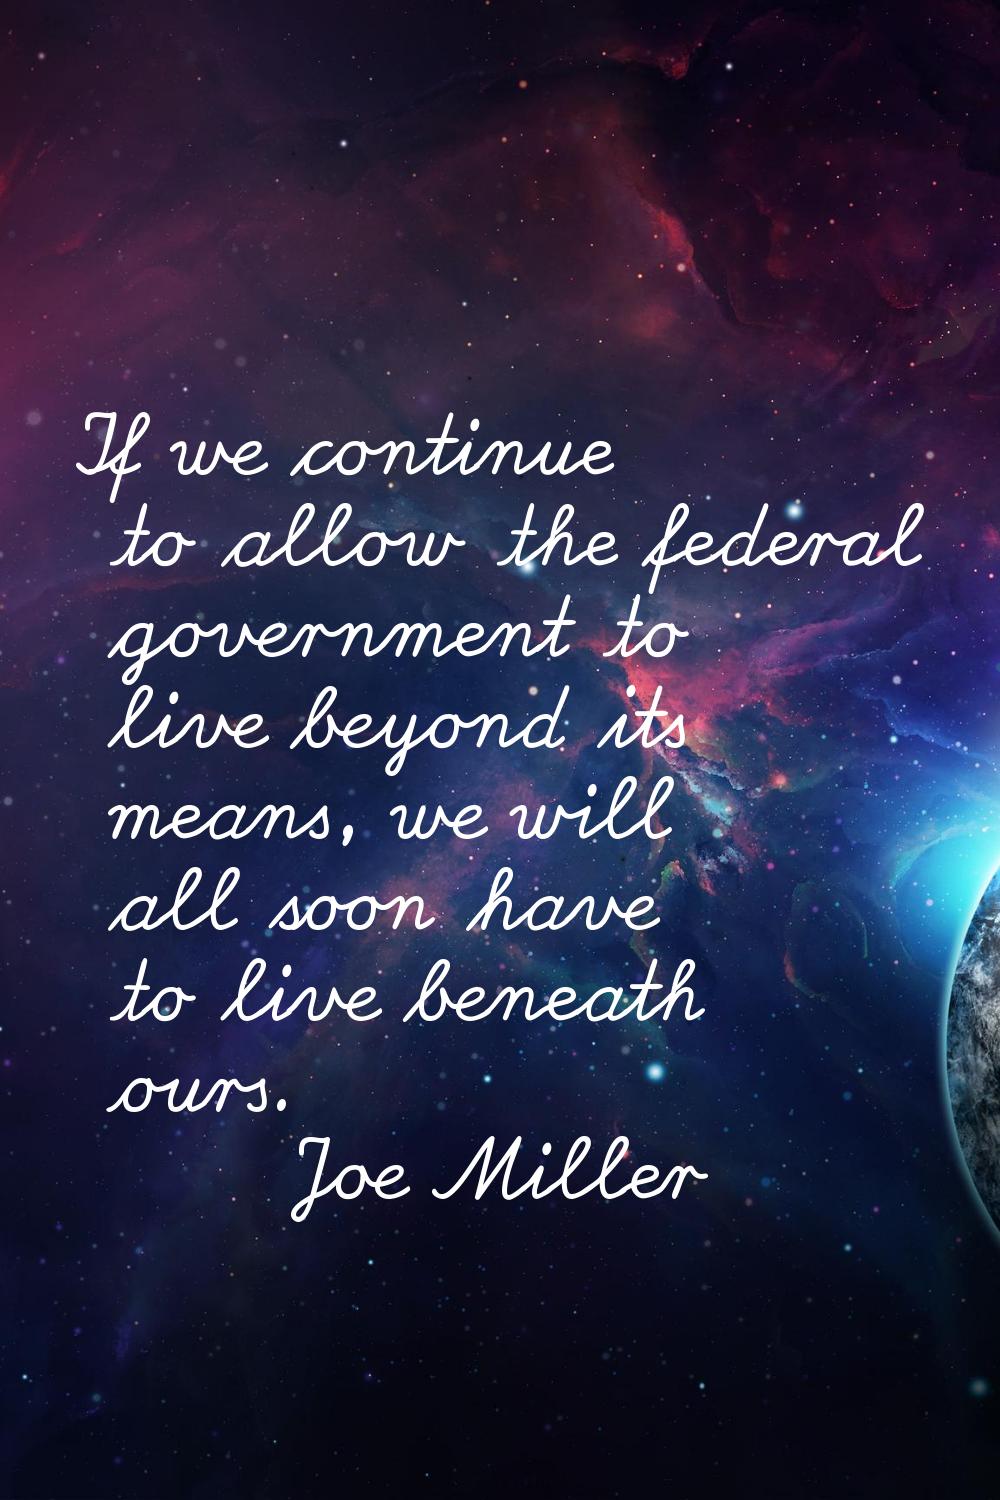 If we continue to allow the federal government to live beyond its means, we will all soon have to l